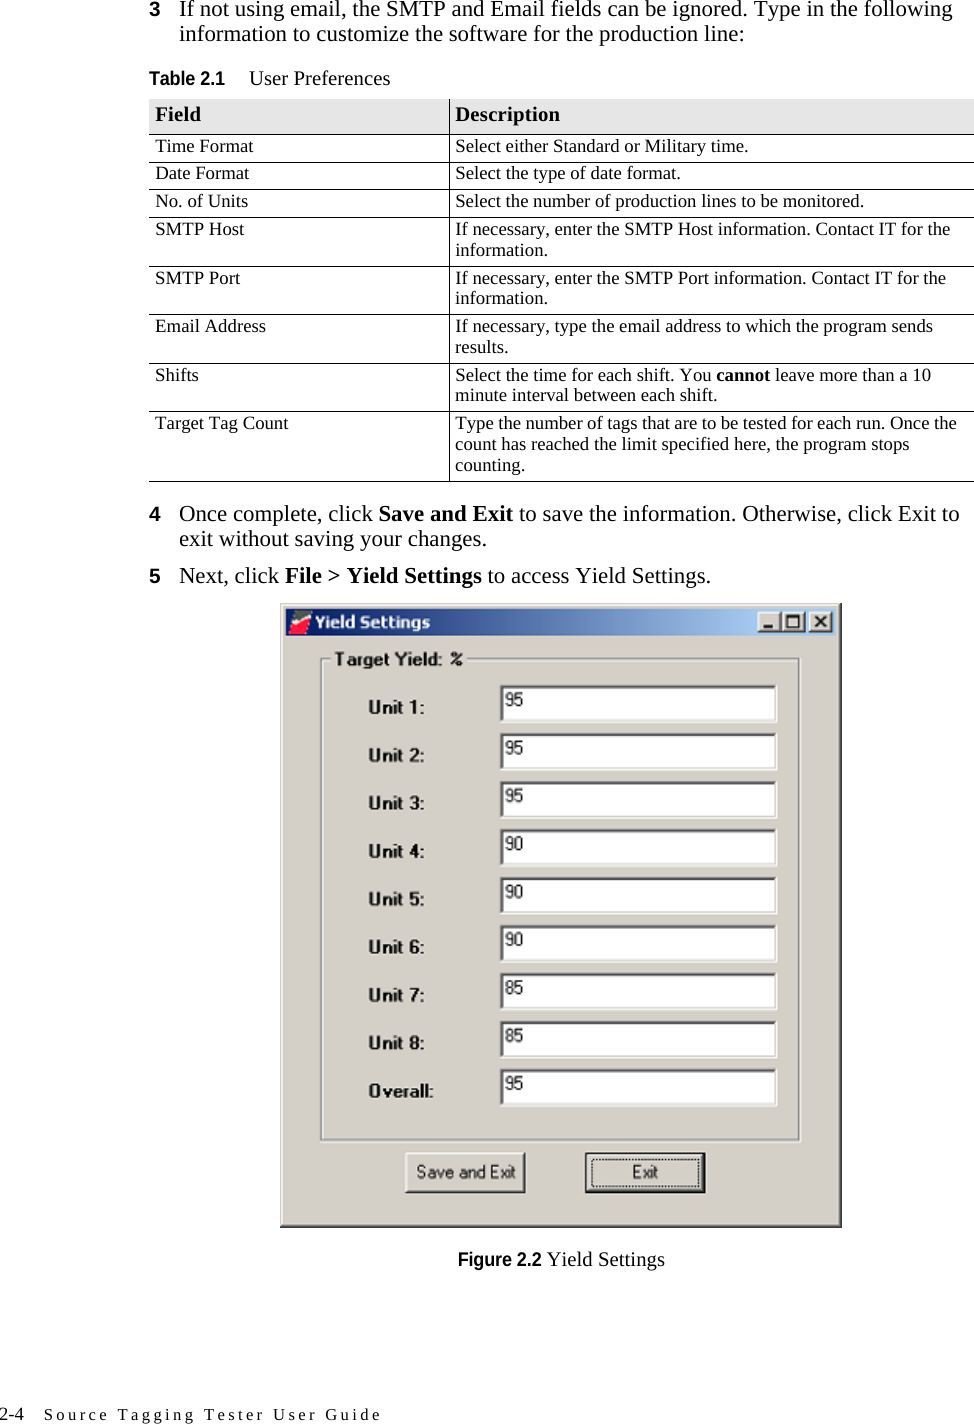 2-4 Source Tagging Tester User Guide3If not using email, the SMTP and Email fields can be ignored. Type in the following information to customize the software for the production line:4Once complete, click Save and Exit to save the information. Otherwise, click Exit to exit without saving your changes.5Next, click File &gt; Yield Settings to access Yield Settings.Figure 2.2 Yield SettingsTable 2.1User PreferencesField DescriptionTime Format Select either Standard or Military time.Date Format Select the type of date format.No. of Units Select the number of production lines to be monitored.SMTP Host If necessary, enter the SMTP Host information. Contact IT for the information.SMTP Port If necessary, enter the SMTP Port information. Contact IT for the information.Email Address If necessary, type the email address to which the program sends results.Shifts Select the time for each shift. You cannot leave more than a 10 minute interval between each shift.Target Tag Count Type the number of tags that are to be tested for each run. Once the count has reached the limit specified here, the program stops counting. 